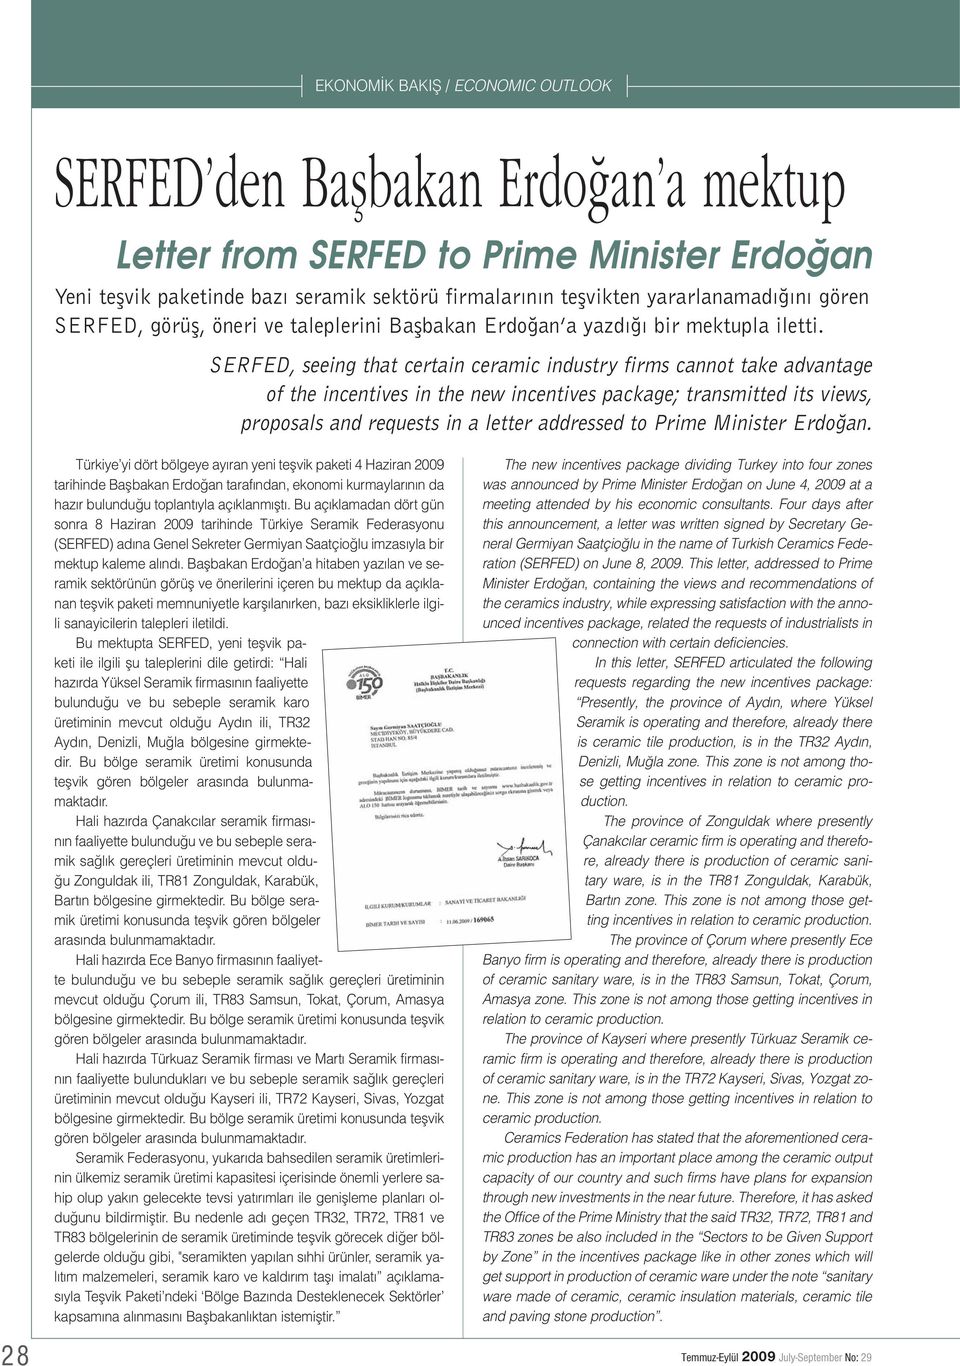 SERFED, seeing that certain ceramic industry firms cannot take advantage of the incentives in the new incentives package; transmitted its views, proposals and requests in a letter addressed to Prime